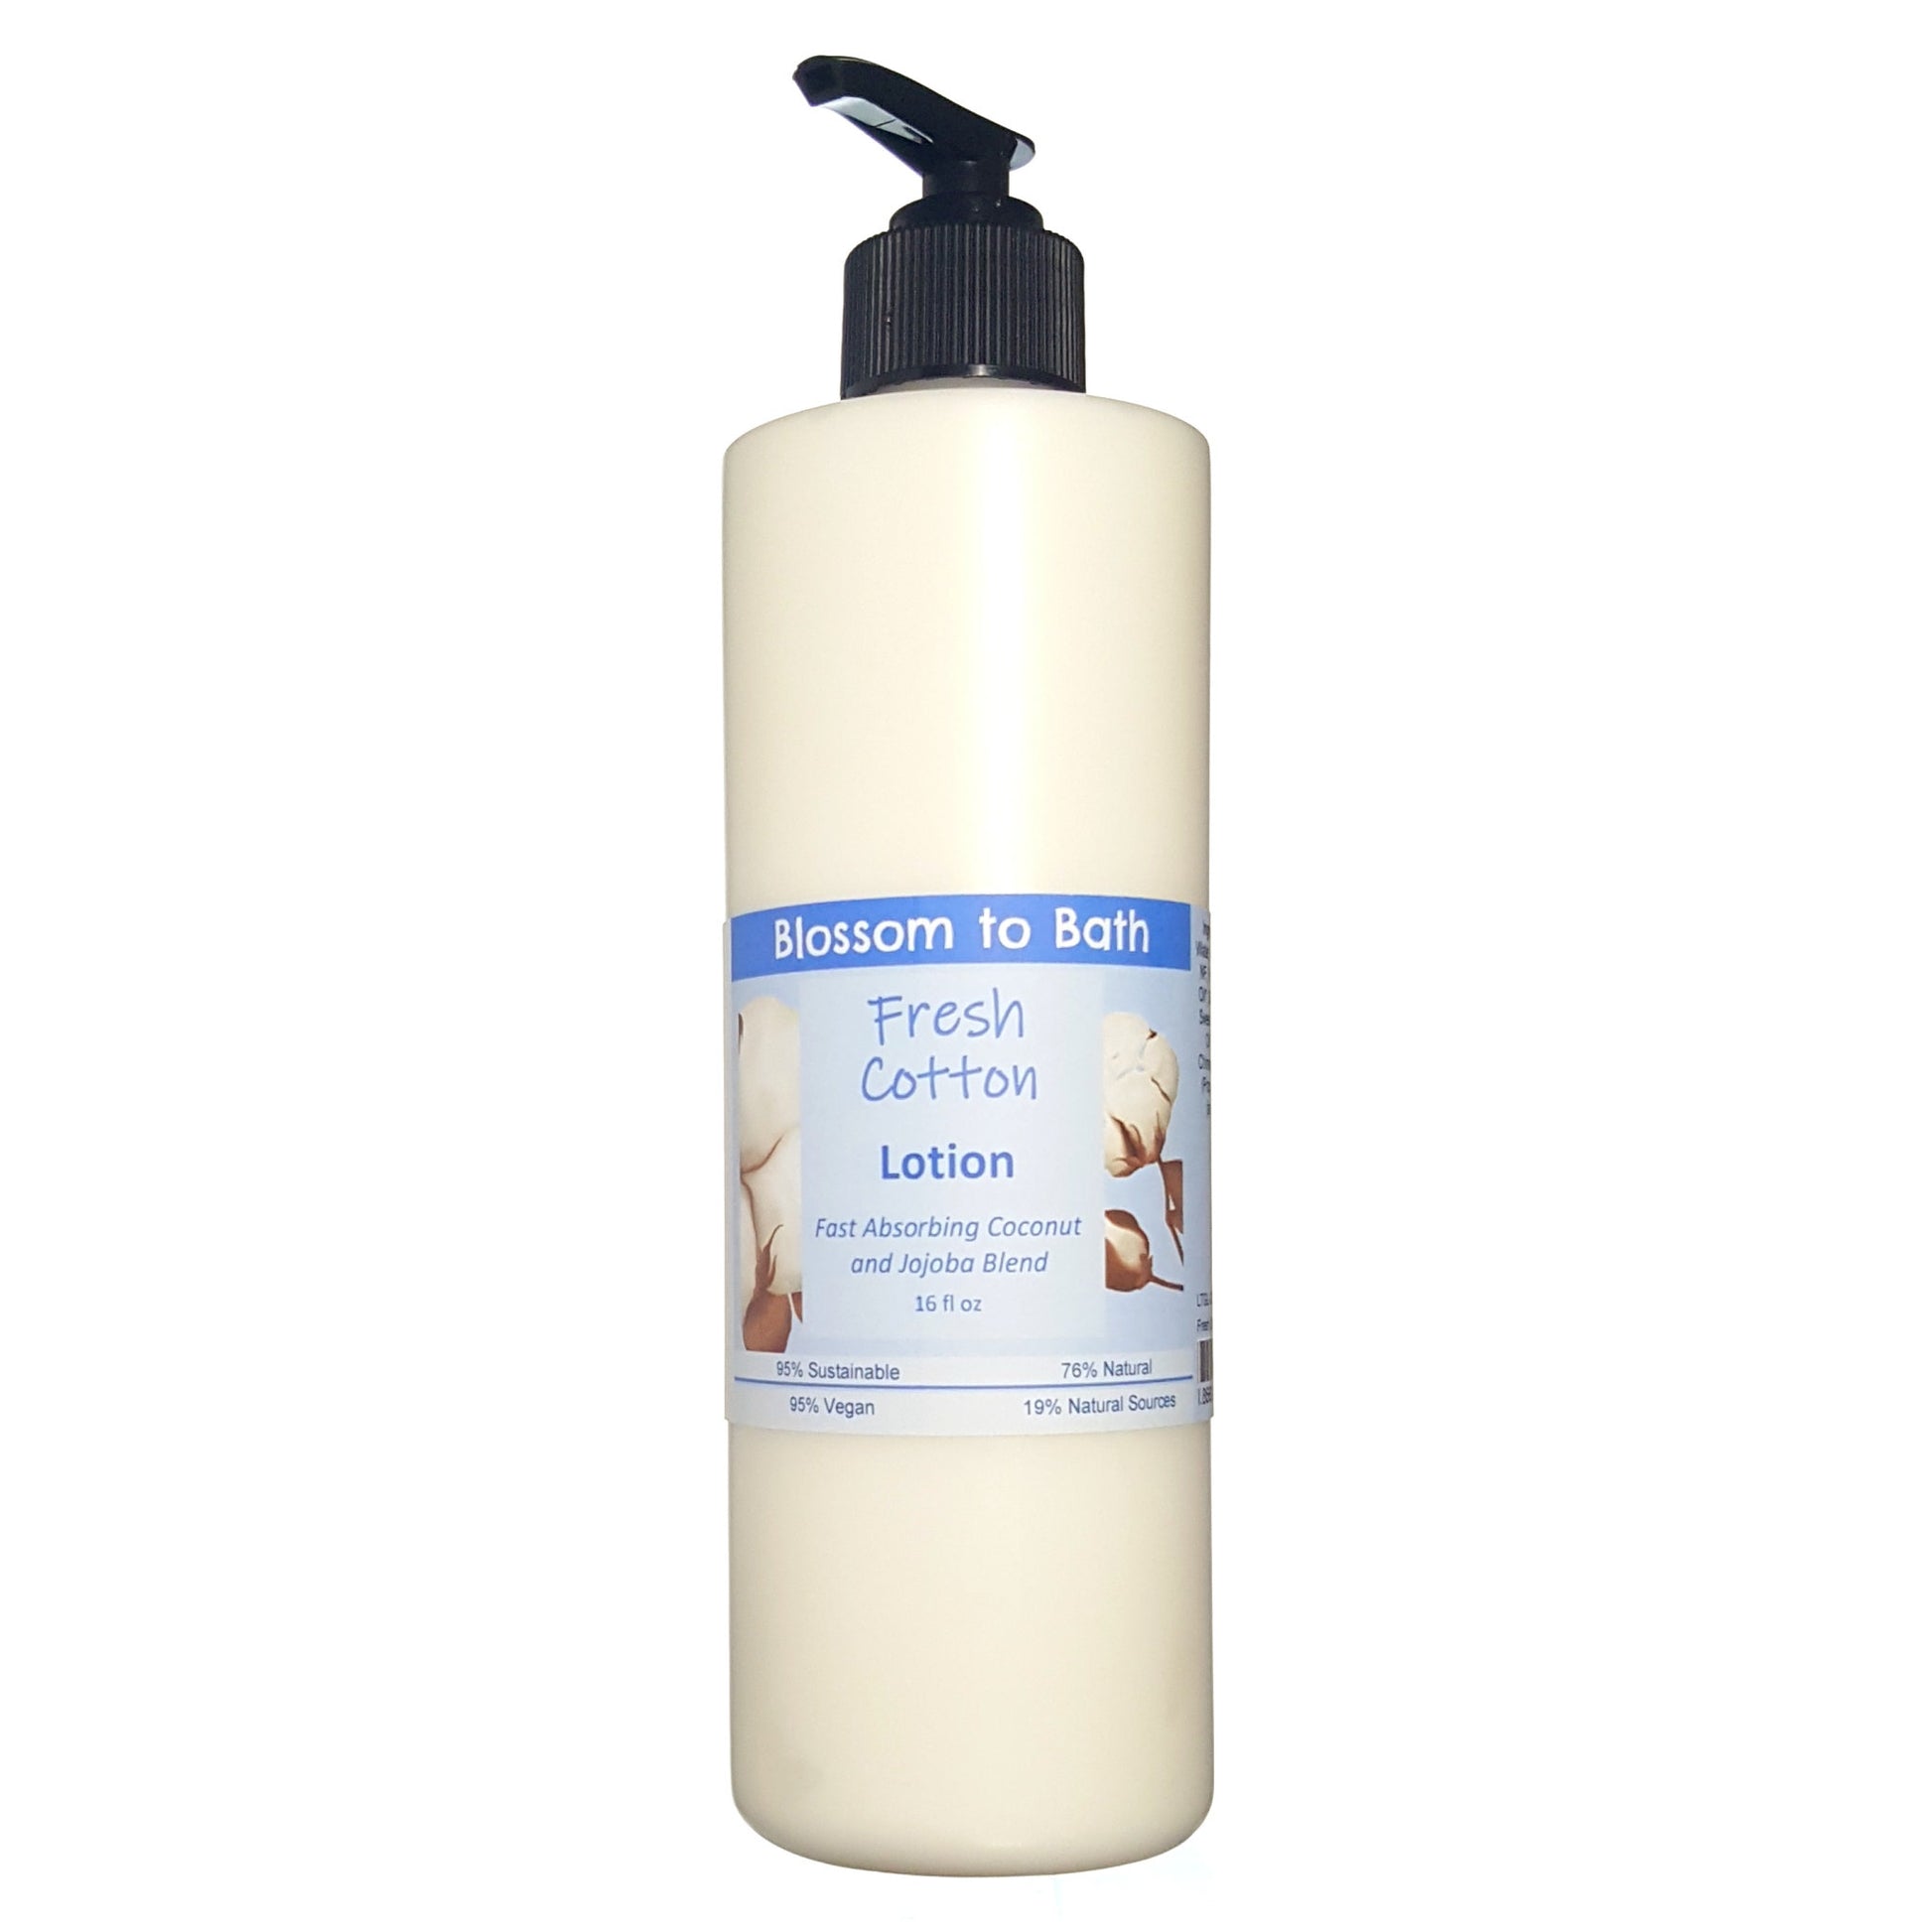 Buy Blossom to Bath Fresh Cotton Lotion from Flowersong Soap Studio.  Daily moisture luxury that soaks in quickly made with organic oils and butters that soften and smooth the skin  Smells like clean sheets drying in a breeze of spring blossoms.